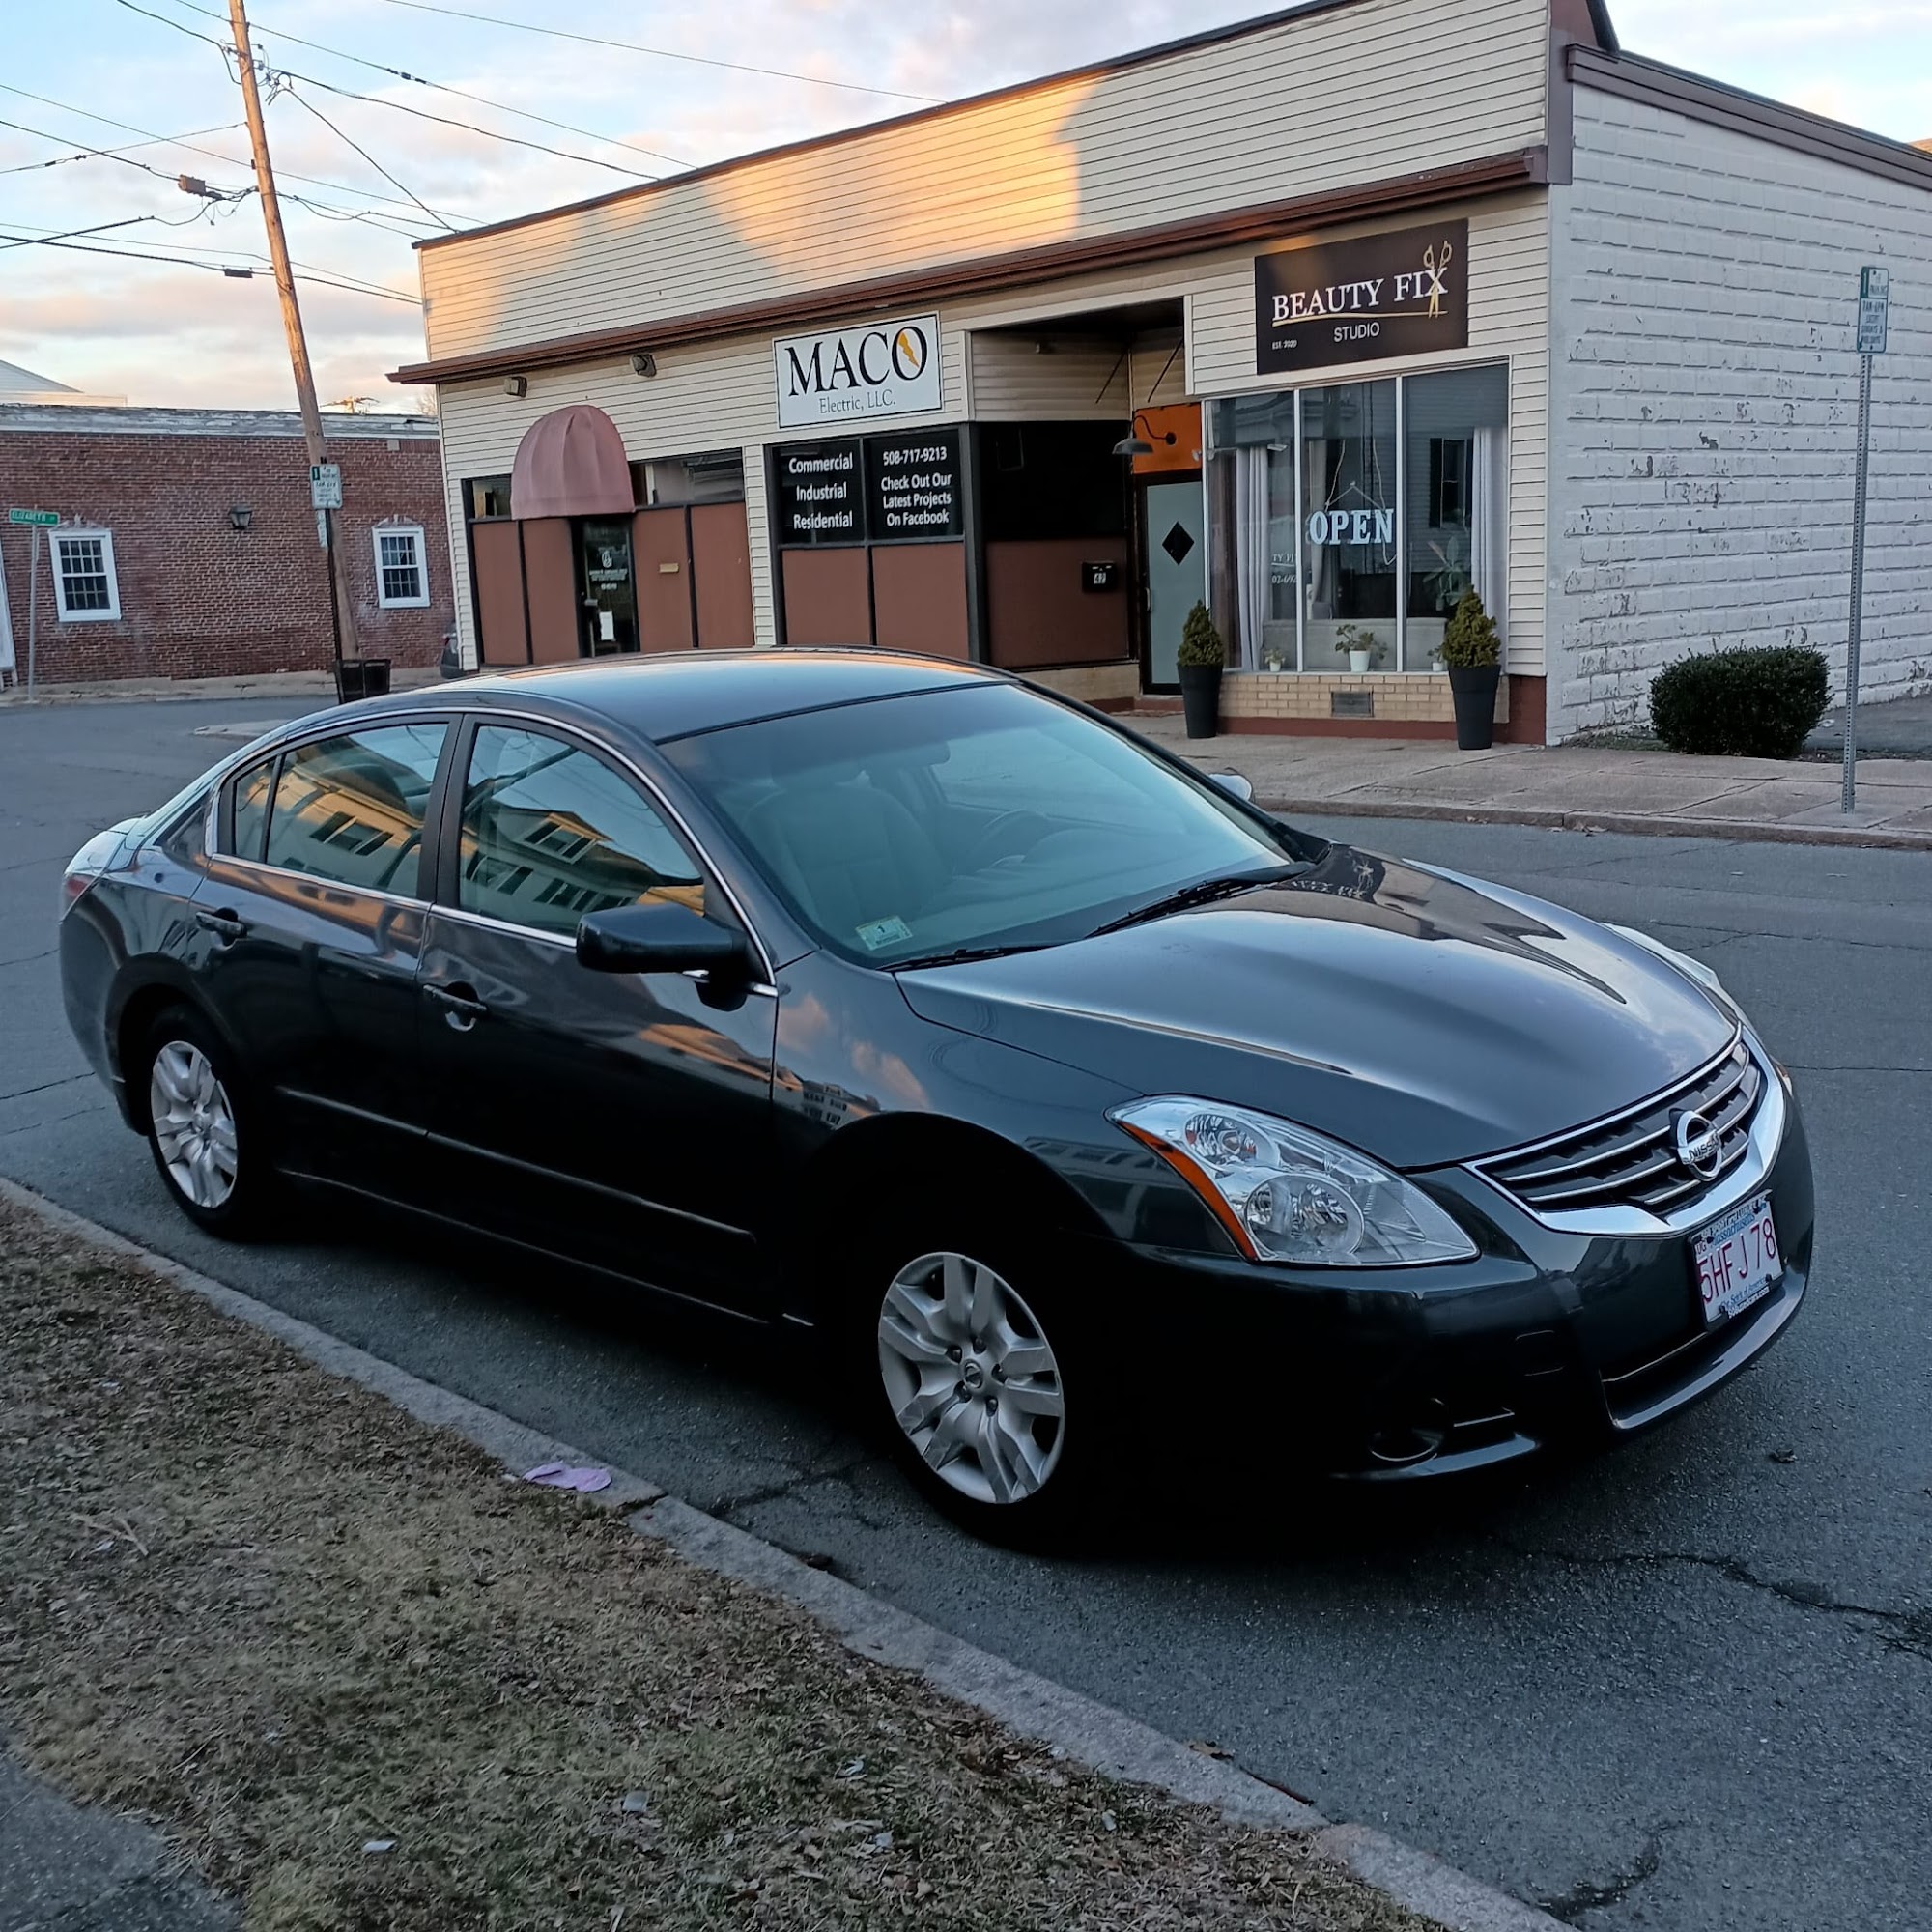 508 Sport And Luxury, Inc. New Bedford